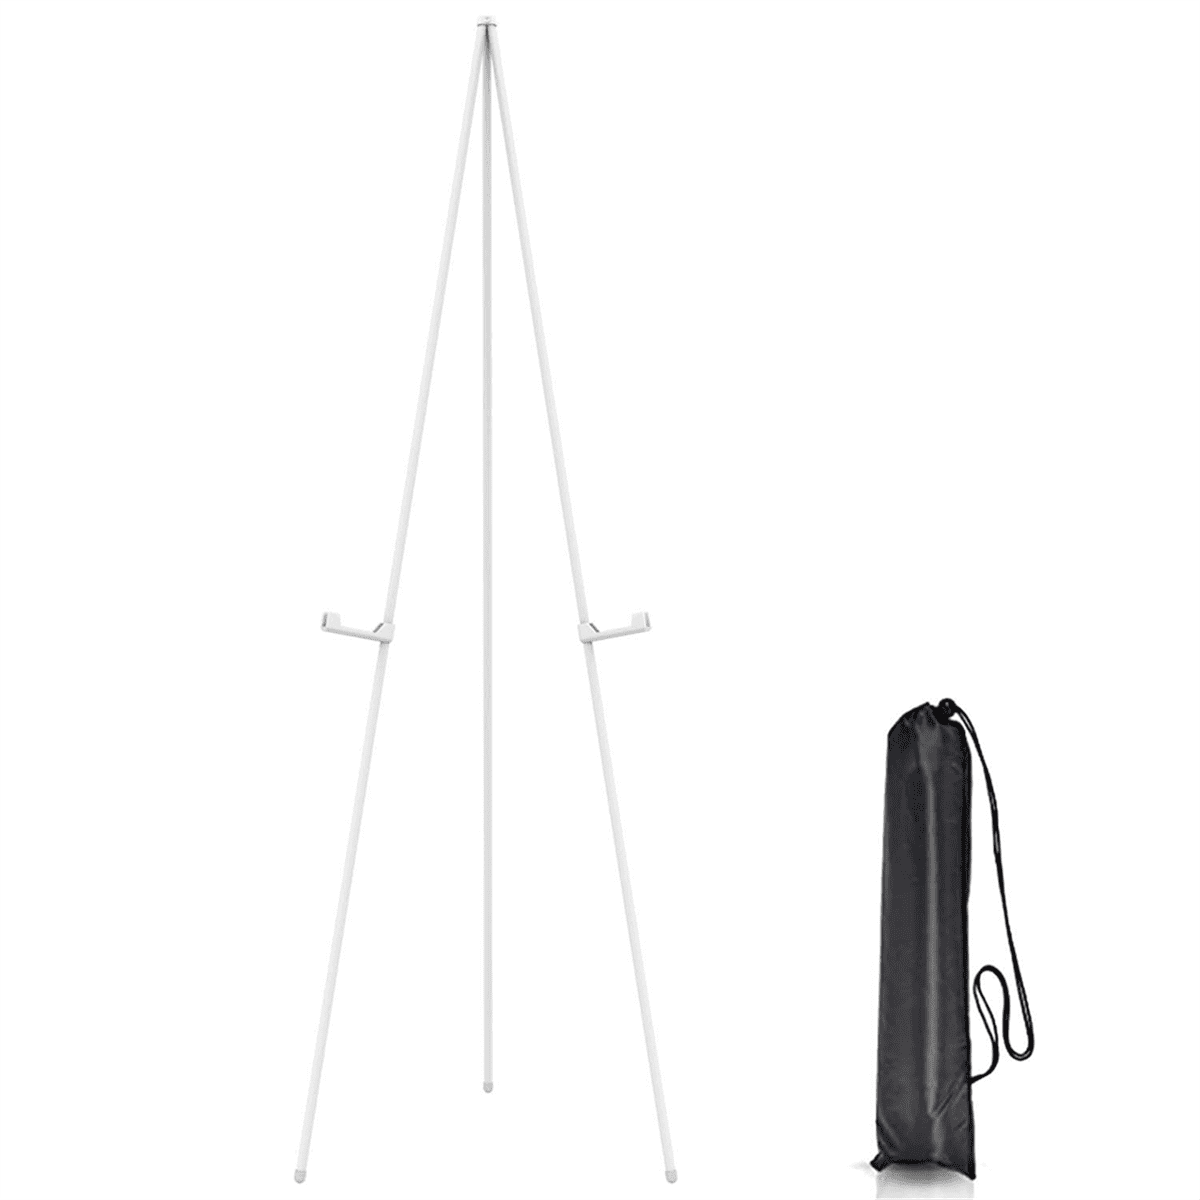 Folding Easels for Display,6 Pack 63 Inch Metal Floor Easel Stand